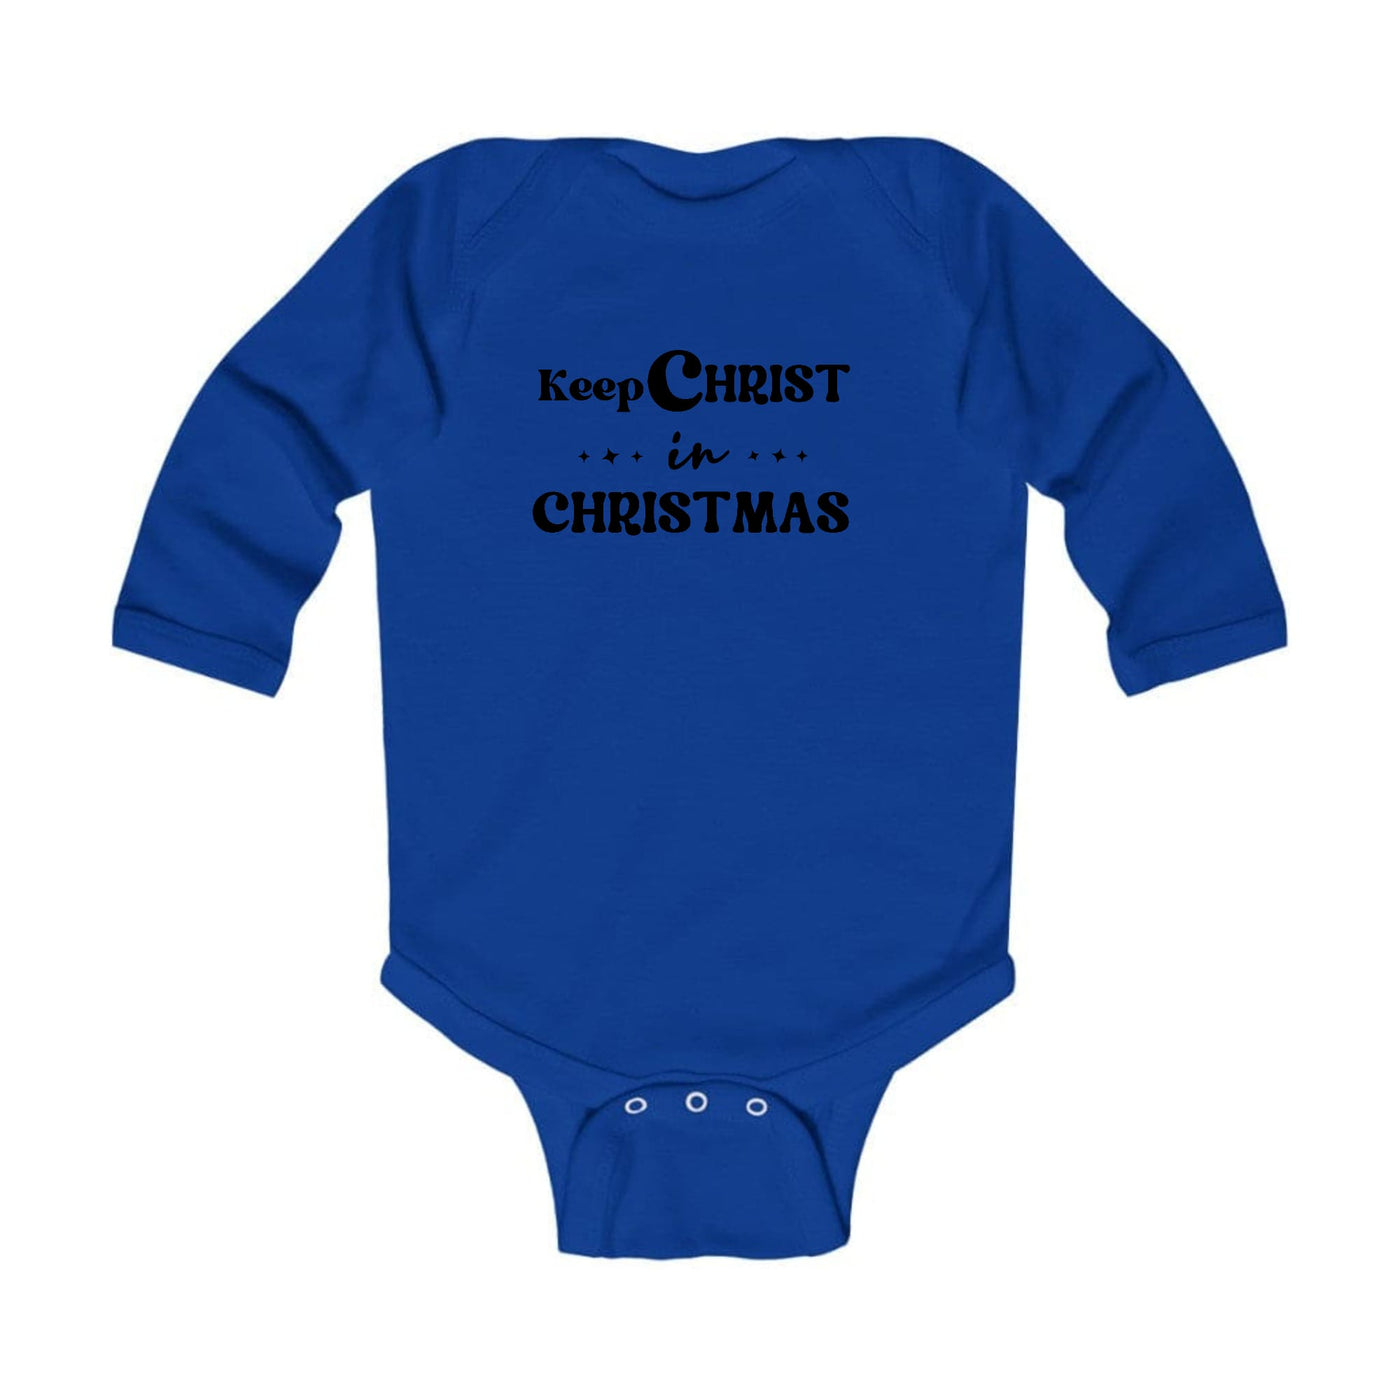 Infant Long Sleeve Graphic T-shirt Keep Christ In Christmas, - Childrens